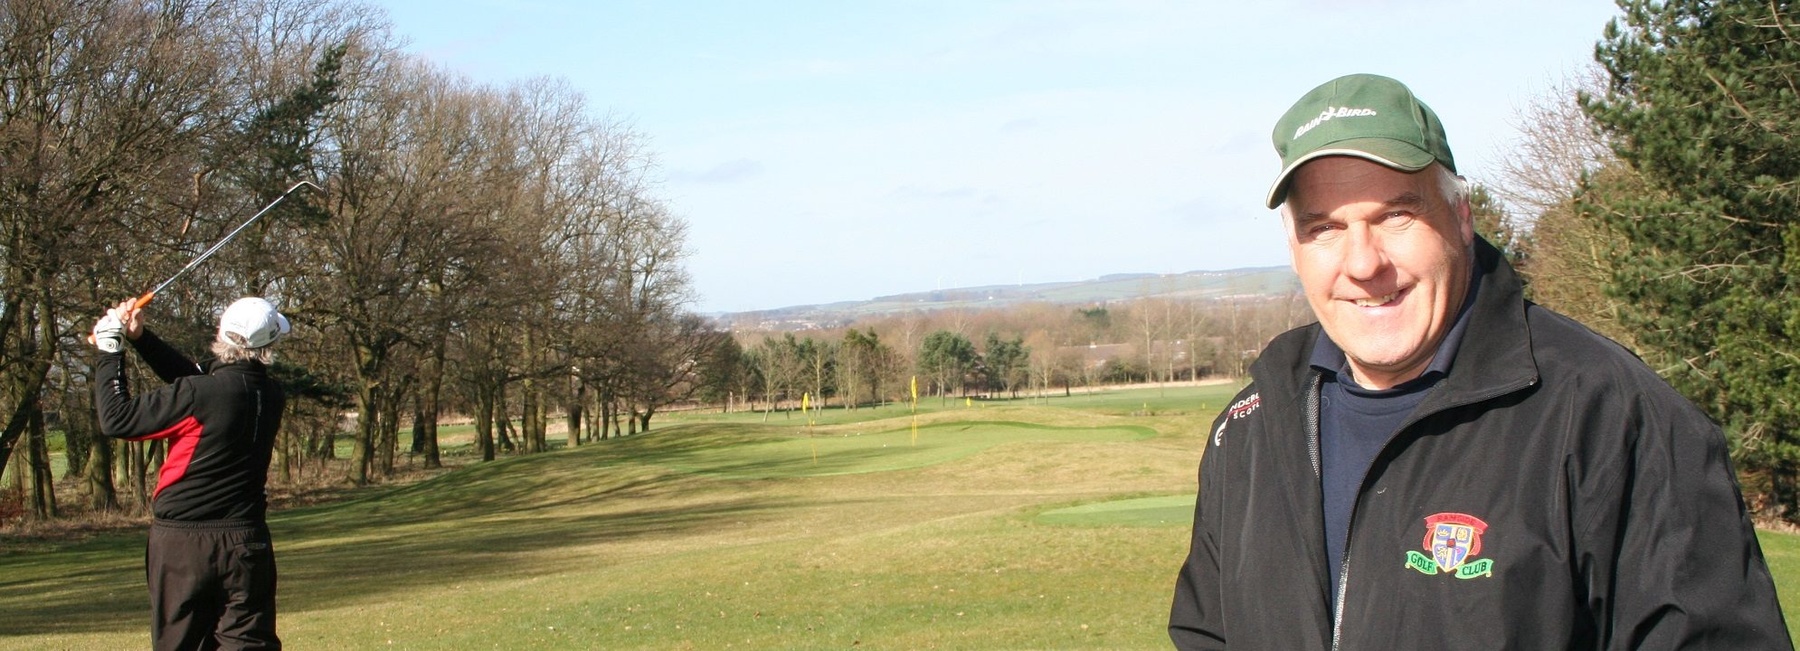 50K investment to mark Ramside Golf Club anniversary